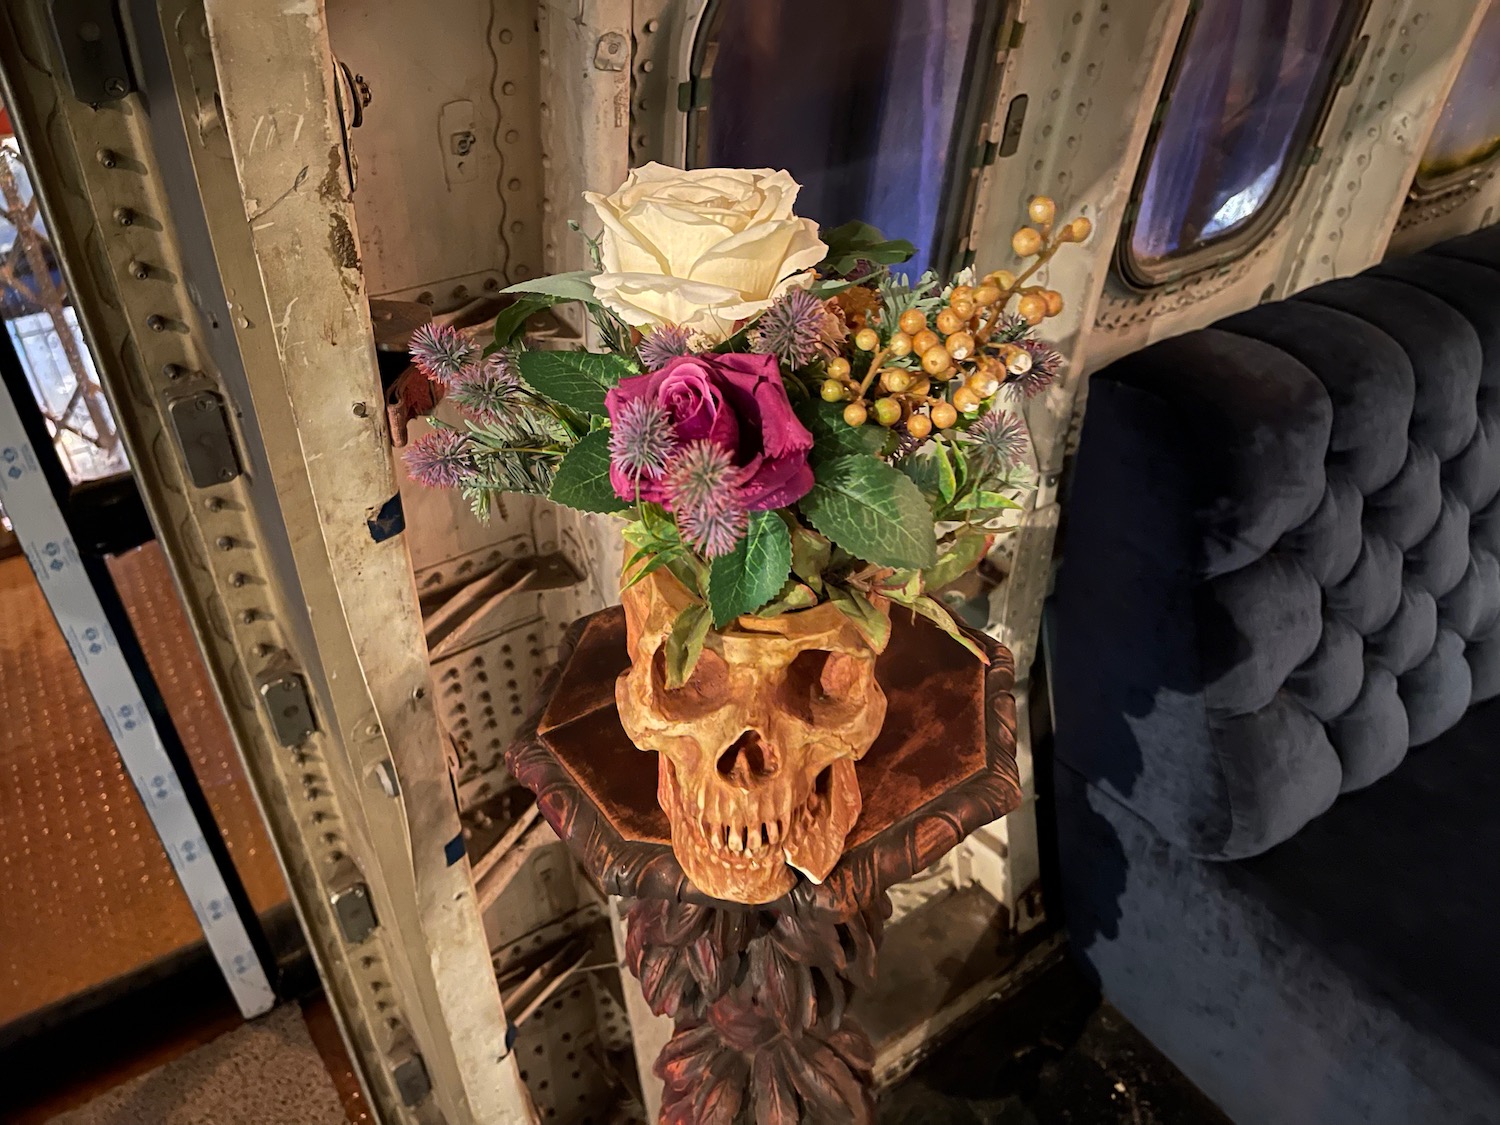 a skull with flowers in a vase